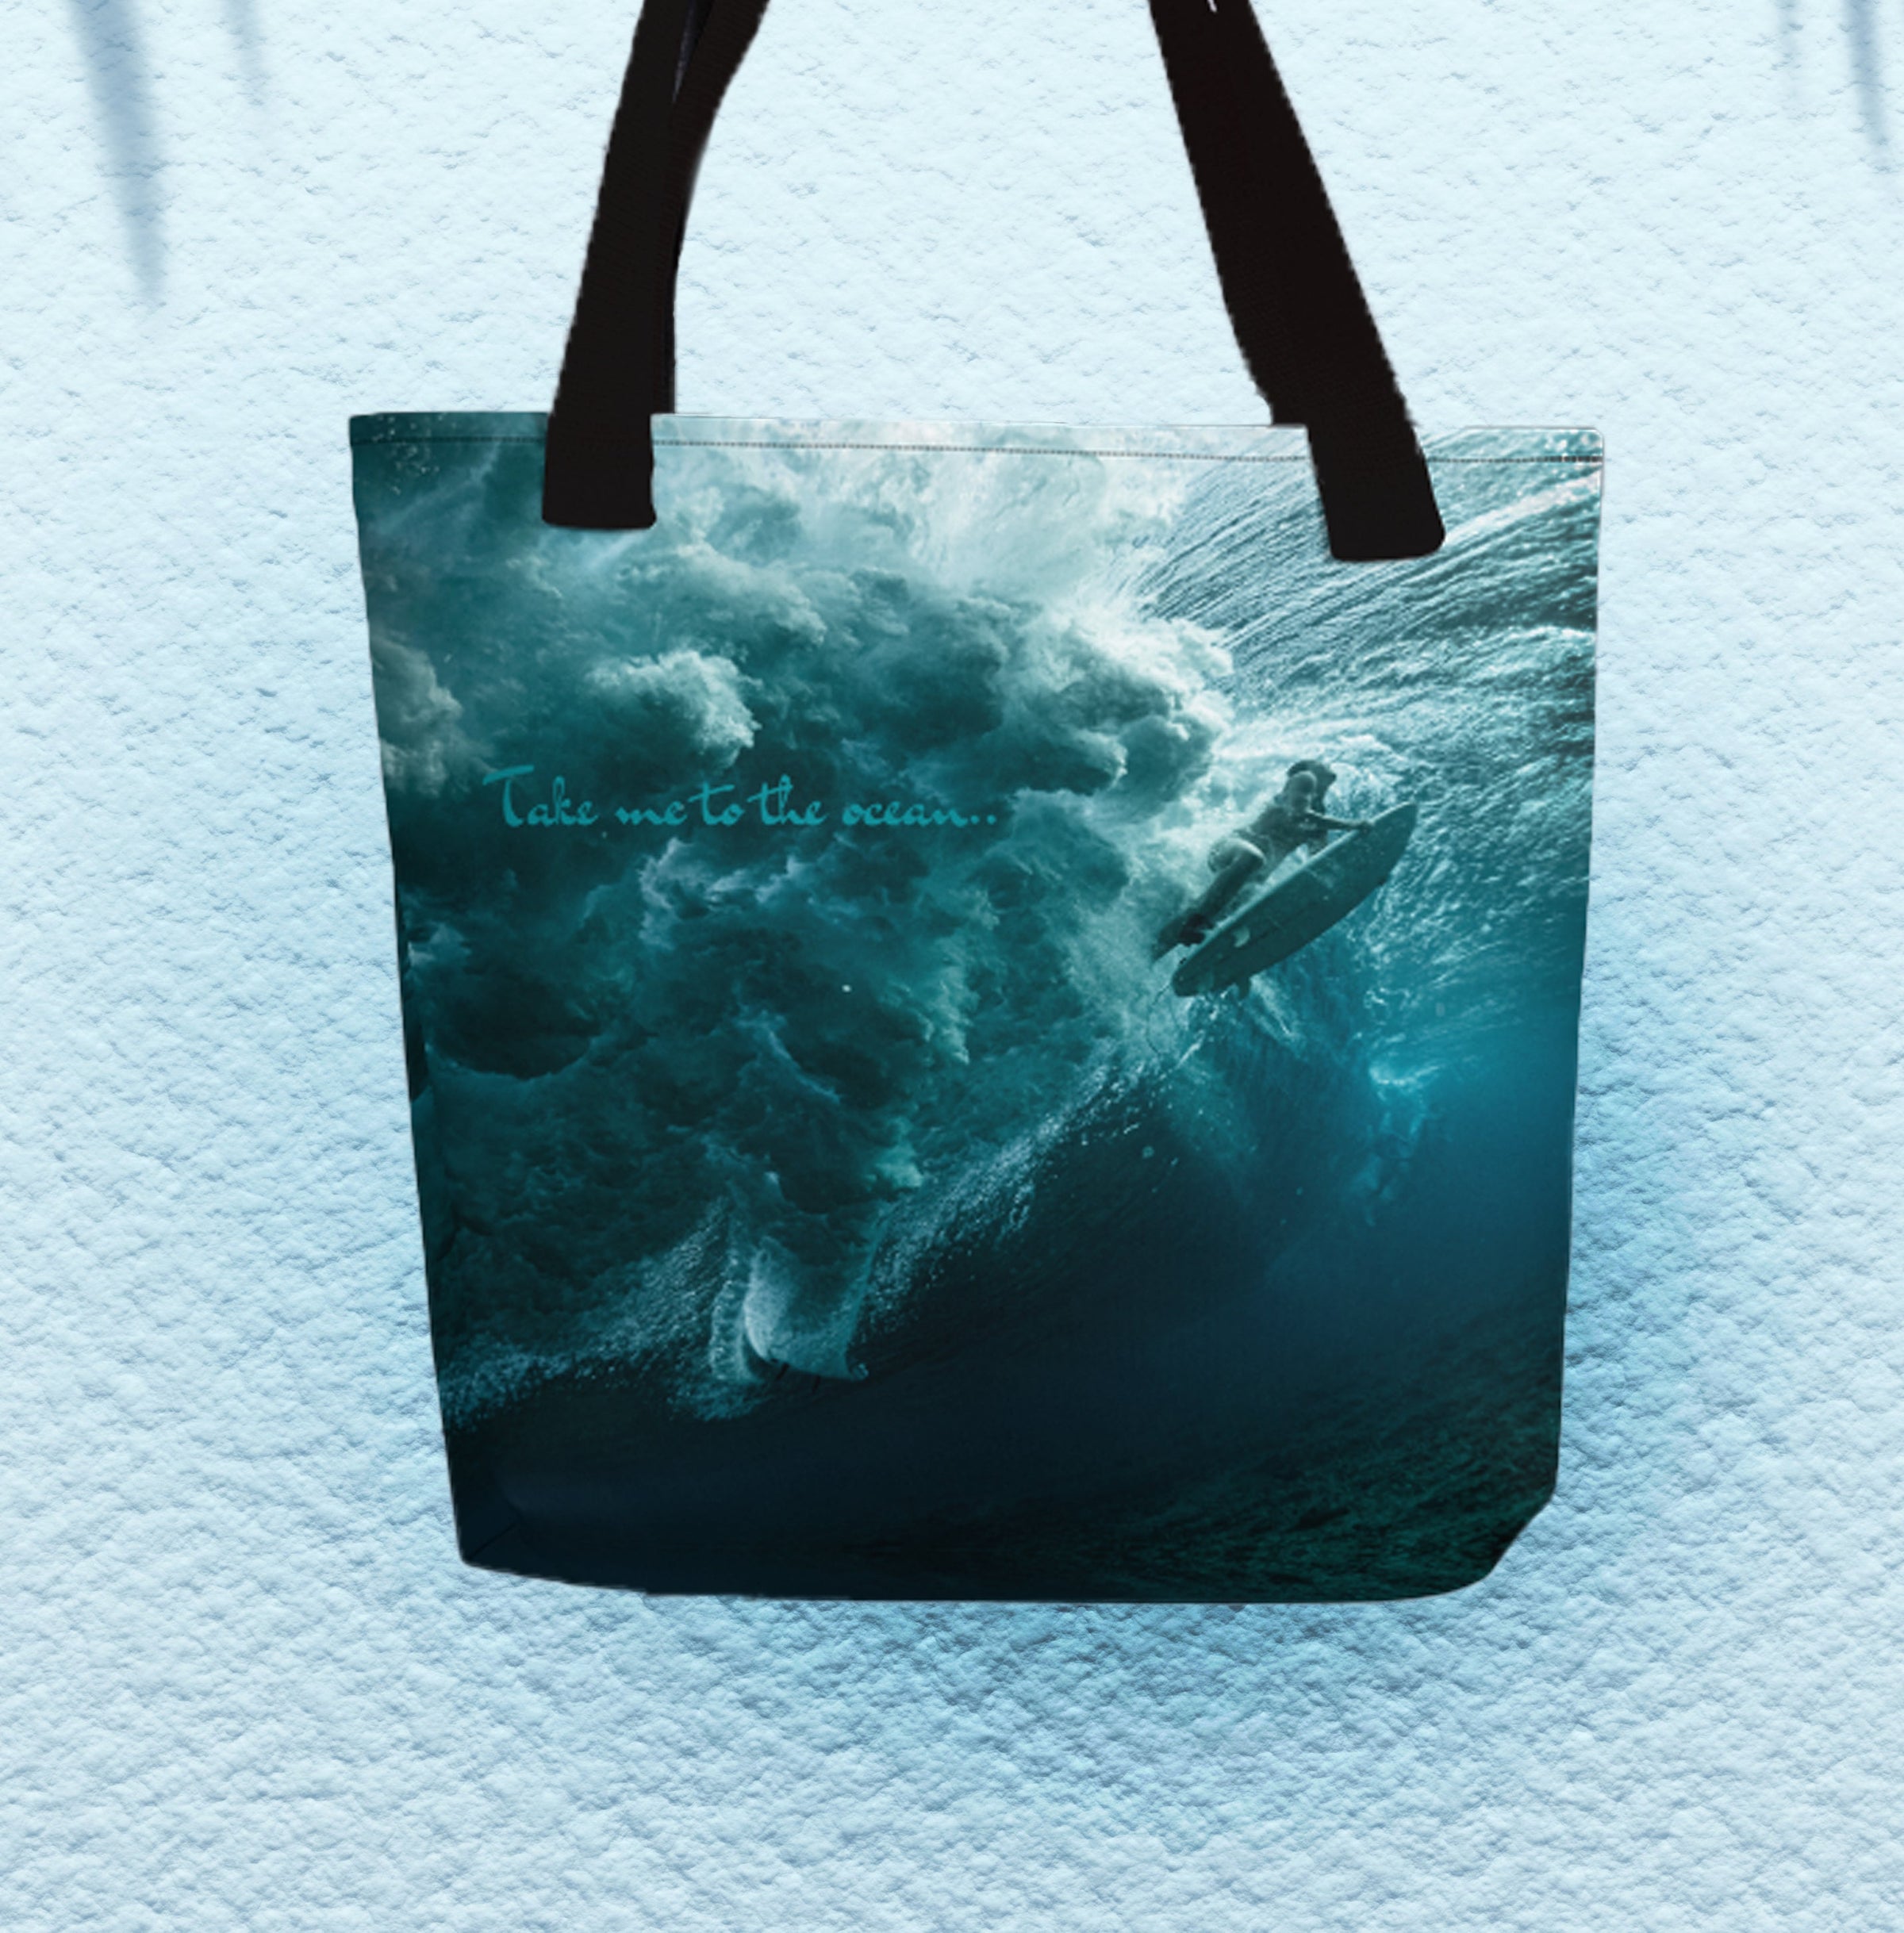 Wave surf tote bag - Take me to the ocean duck-dive surf tote bag